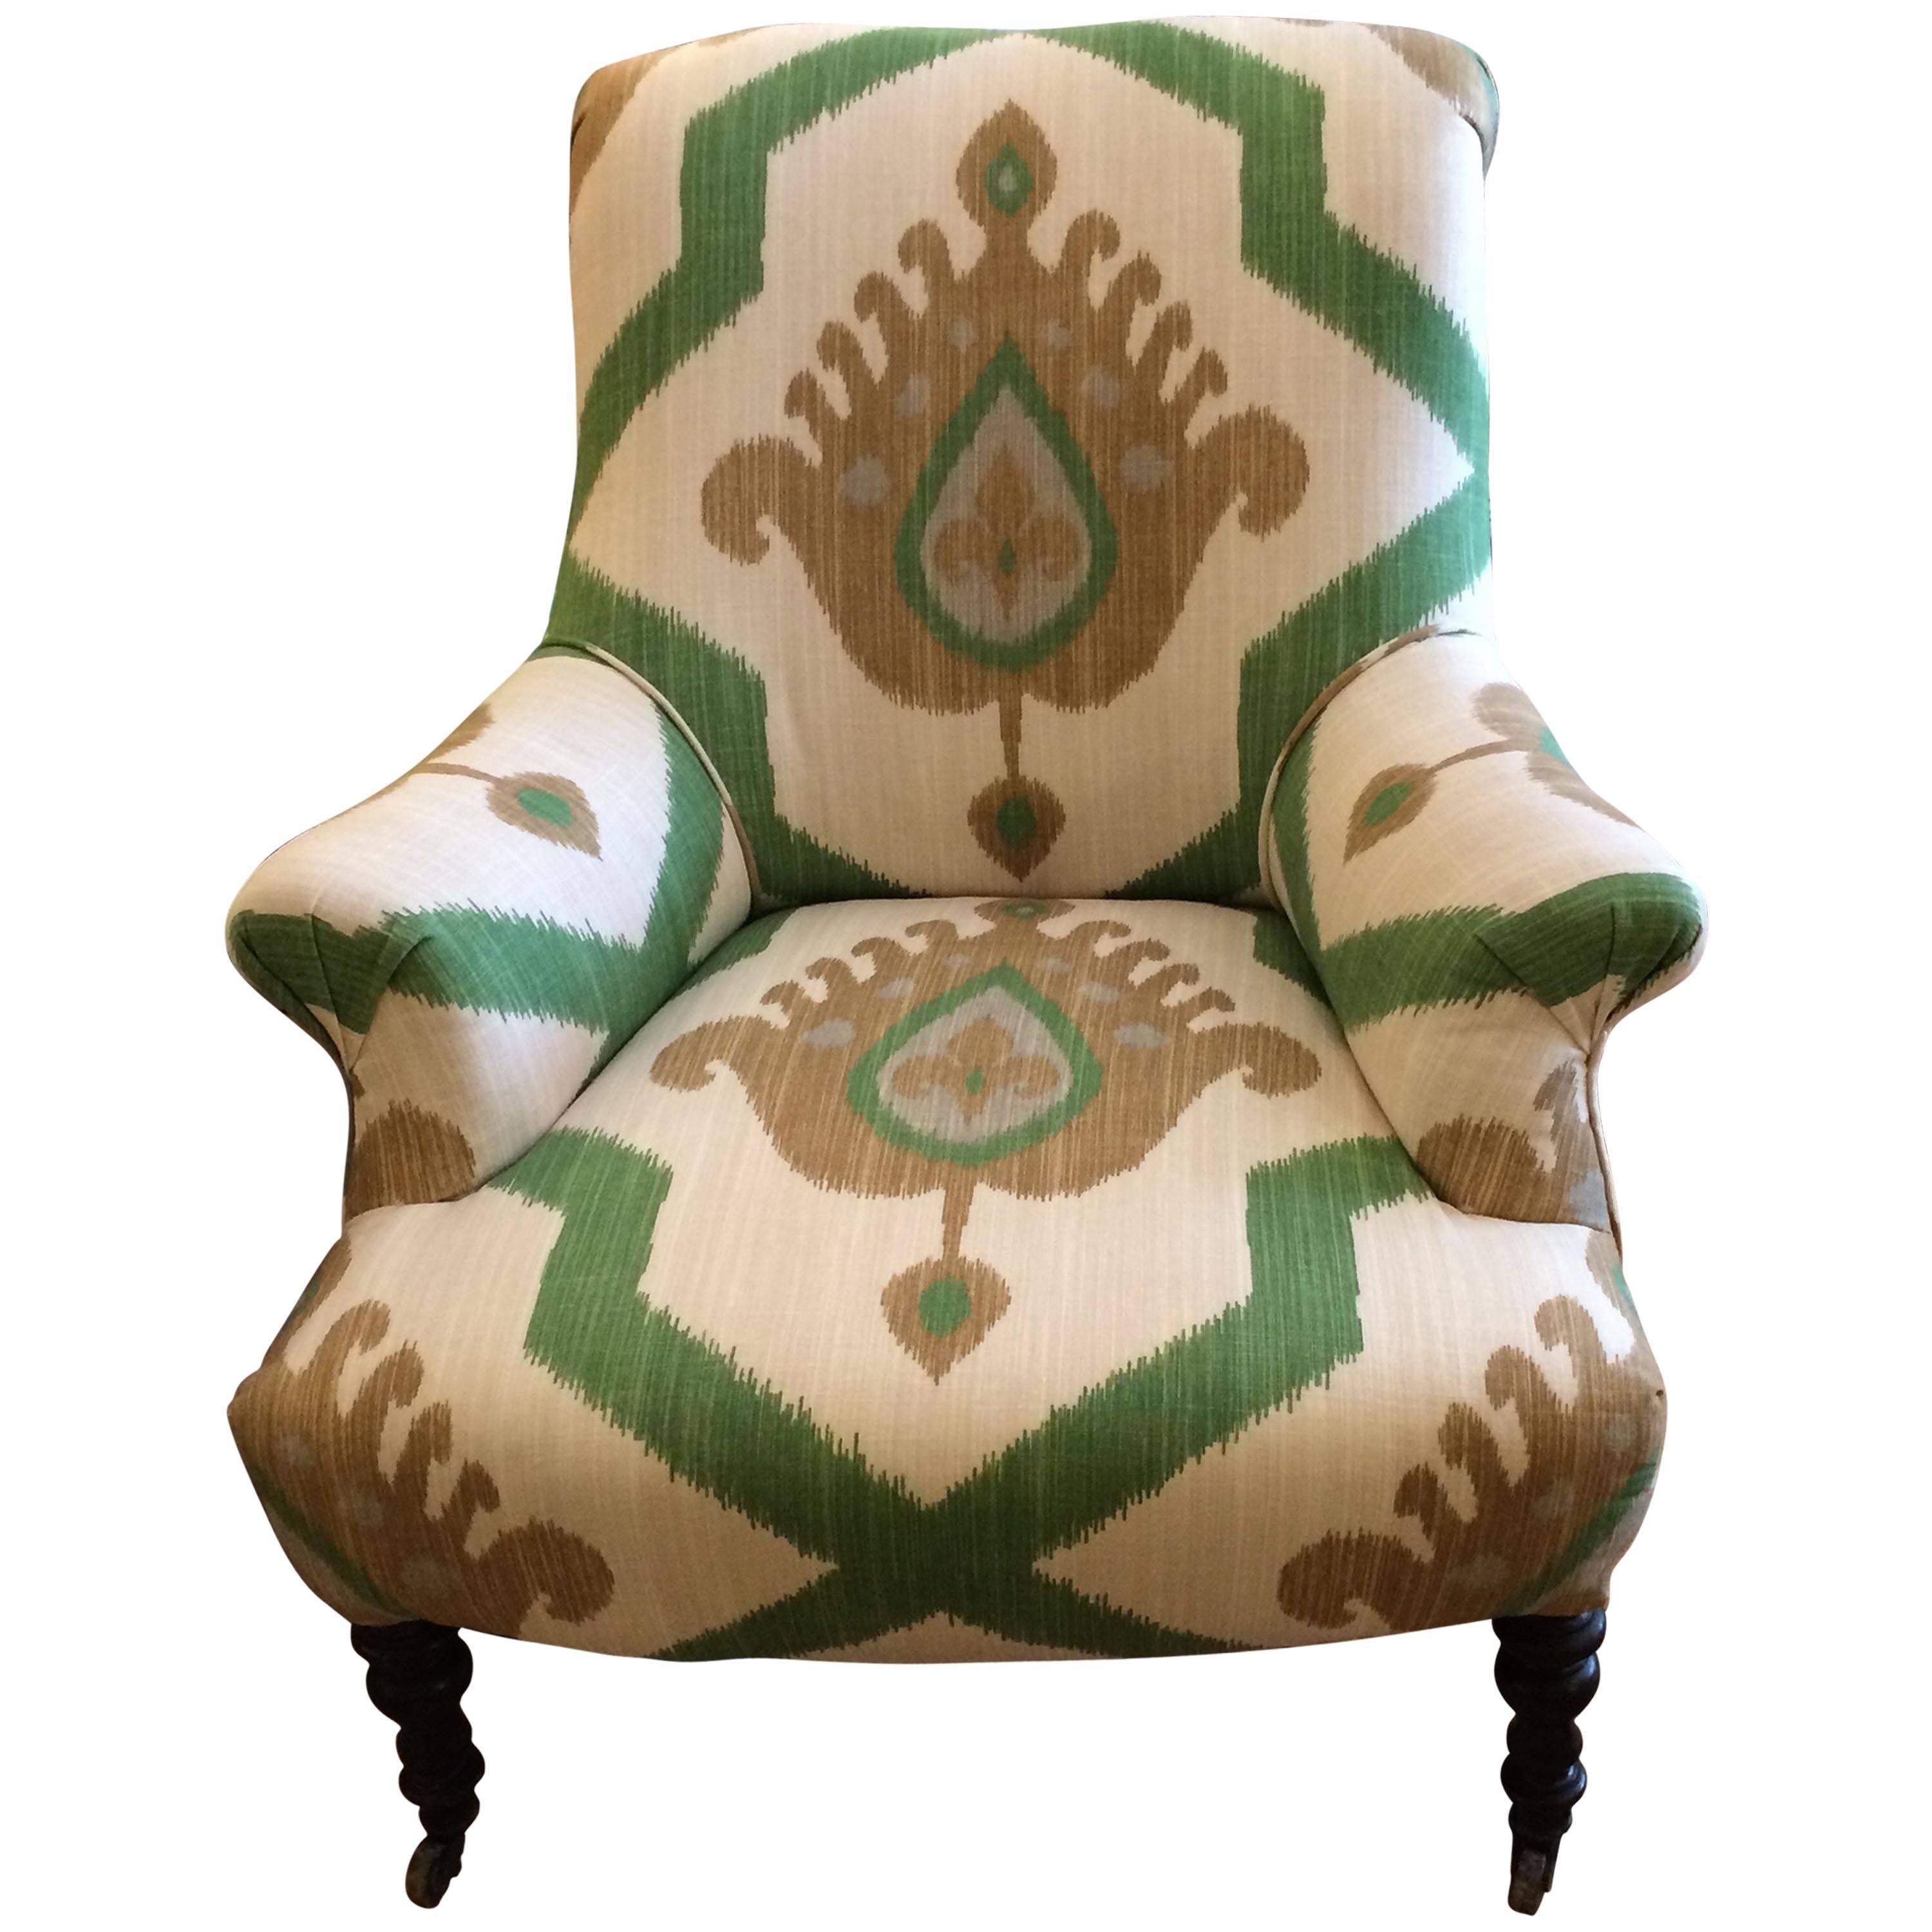 Inviting Low Slung Vintage Club Chair in Ikat Fabric